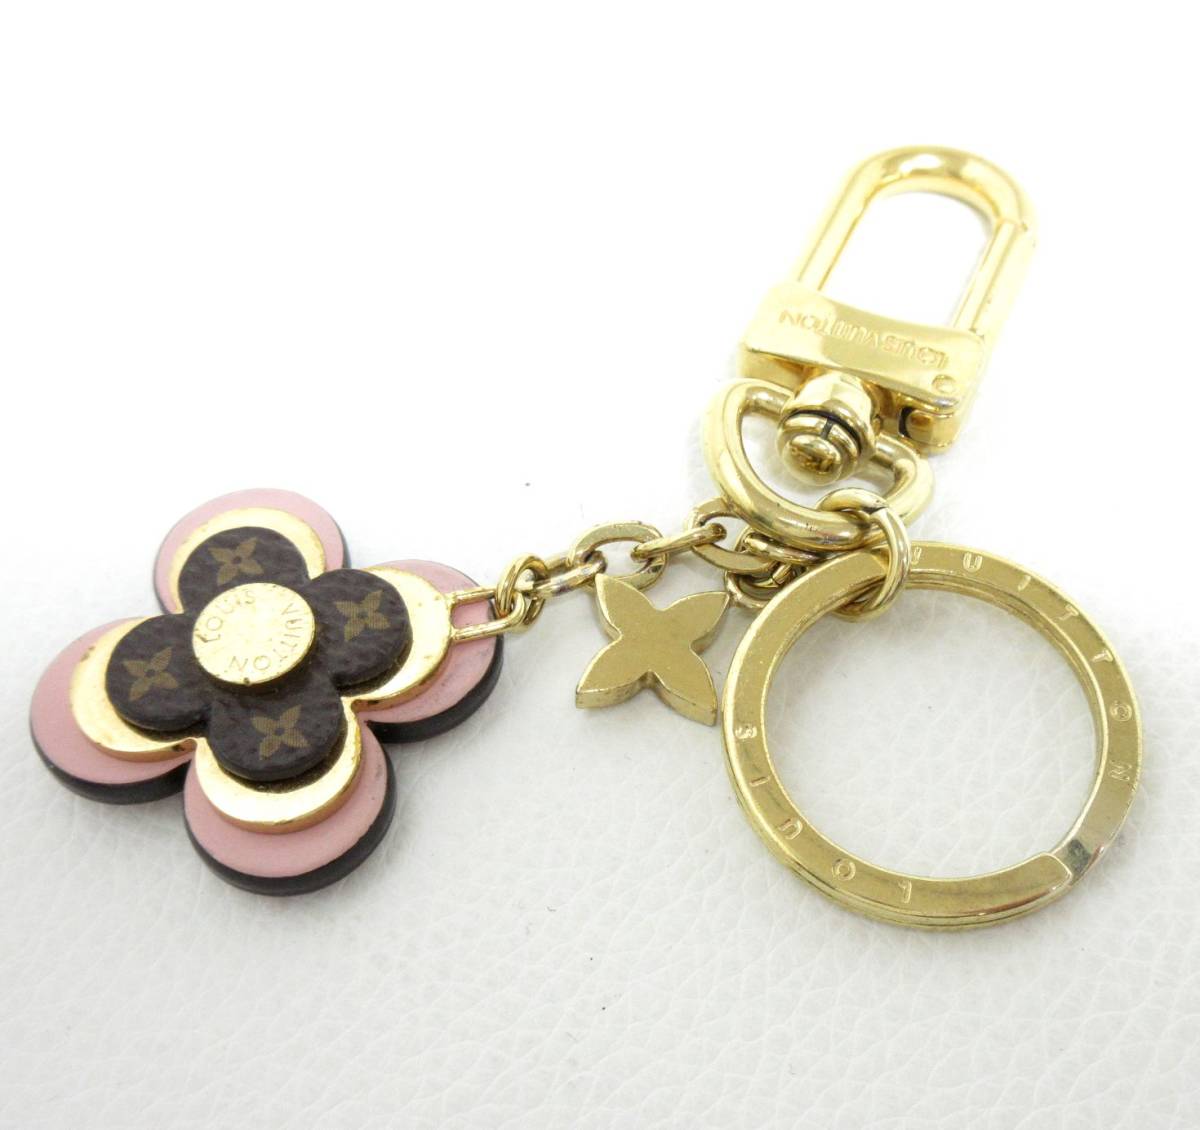 12193*[SALE]LOUIS VUITTON Louis Vuitton M63085 blue ming flower back charm / key holder MADE IN ITALY used USED